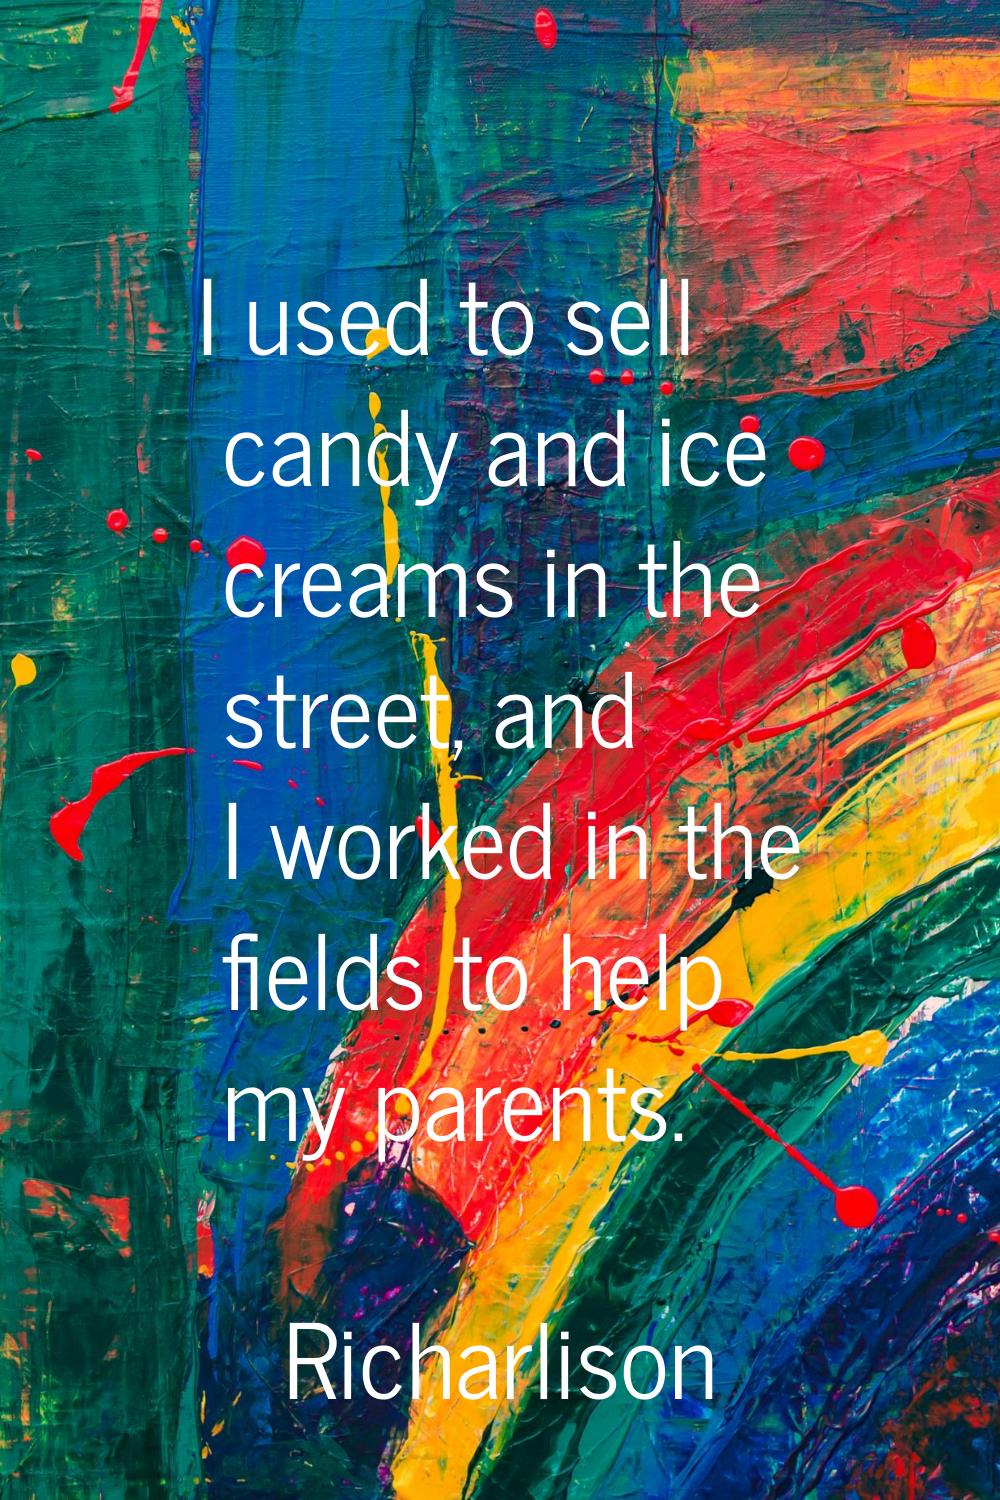 I used to sell candy and ice creams in the street, and I worked in the fields to help my parents.